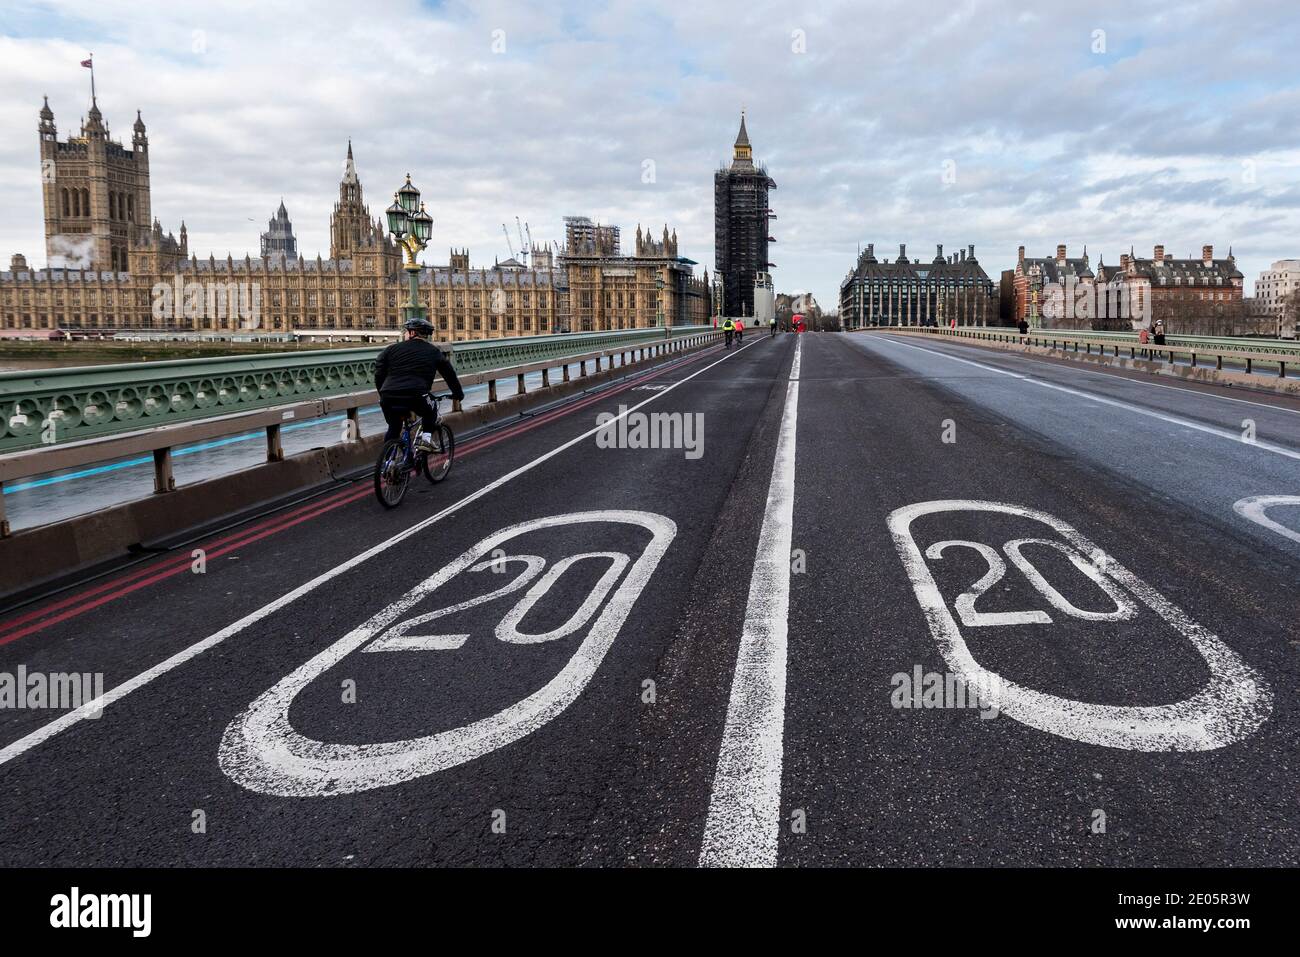 London, UK.  30 December 2020. The Houses of Parliament stand behind a pair of 20 miles per hour speed limit signs on the road on Westminster Bridge which, together, show the year 2020.  As 2020 draws to a close, MPs are due to ratify the UK/EU trade deal in Parliament today.  At the same time, the UK government is trying to tackle the effects of the record levels of coronavirus cases which may require an increase in national tier alert levels.  Credit: Stephen Chung / Alamy Live News Stock Photo